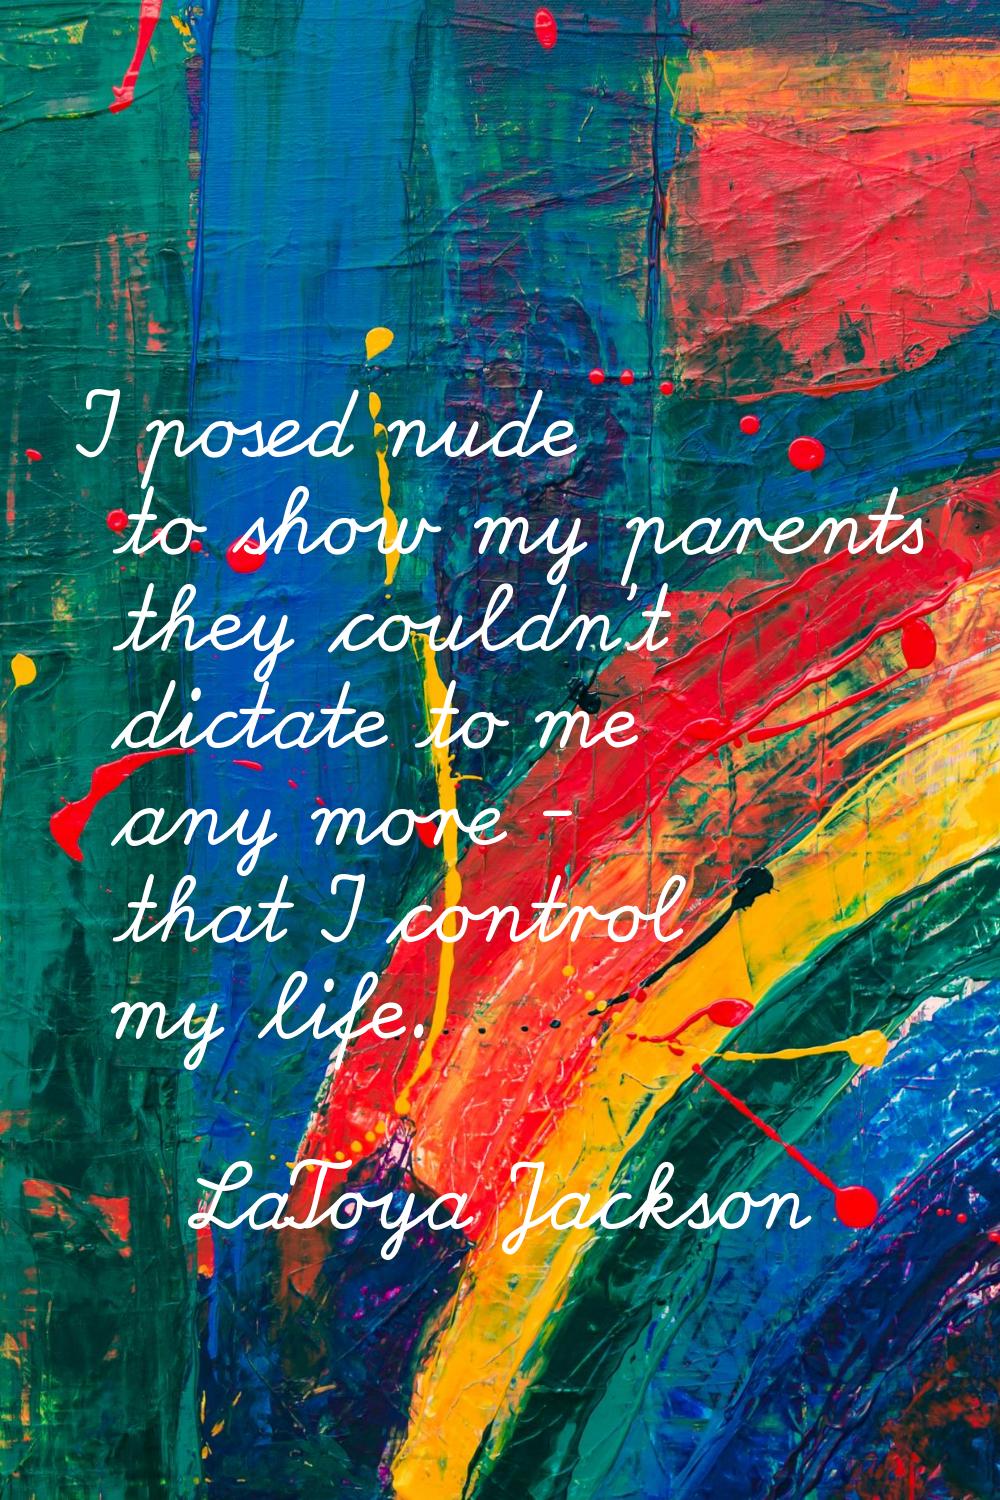 I posed nude to show my parents they couldn't dictate to me any more - that I control my life.